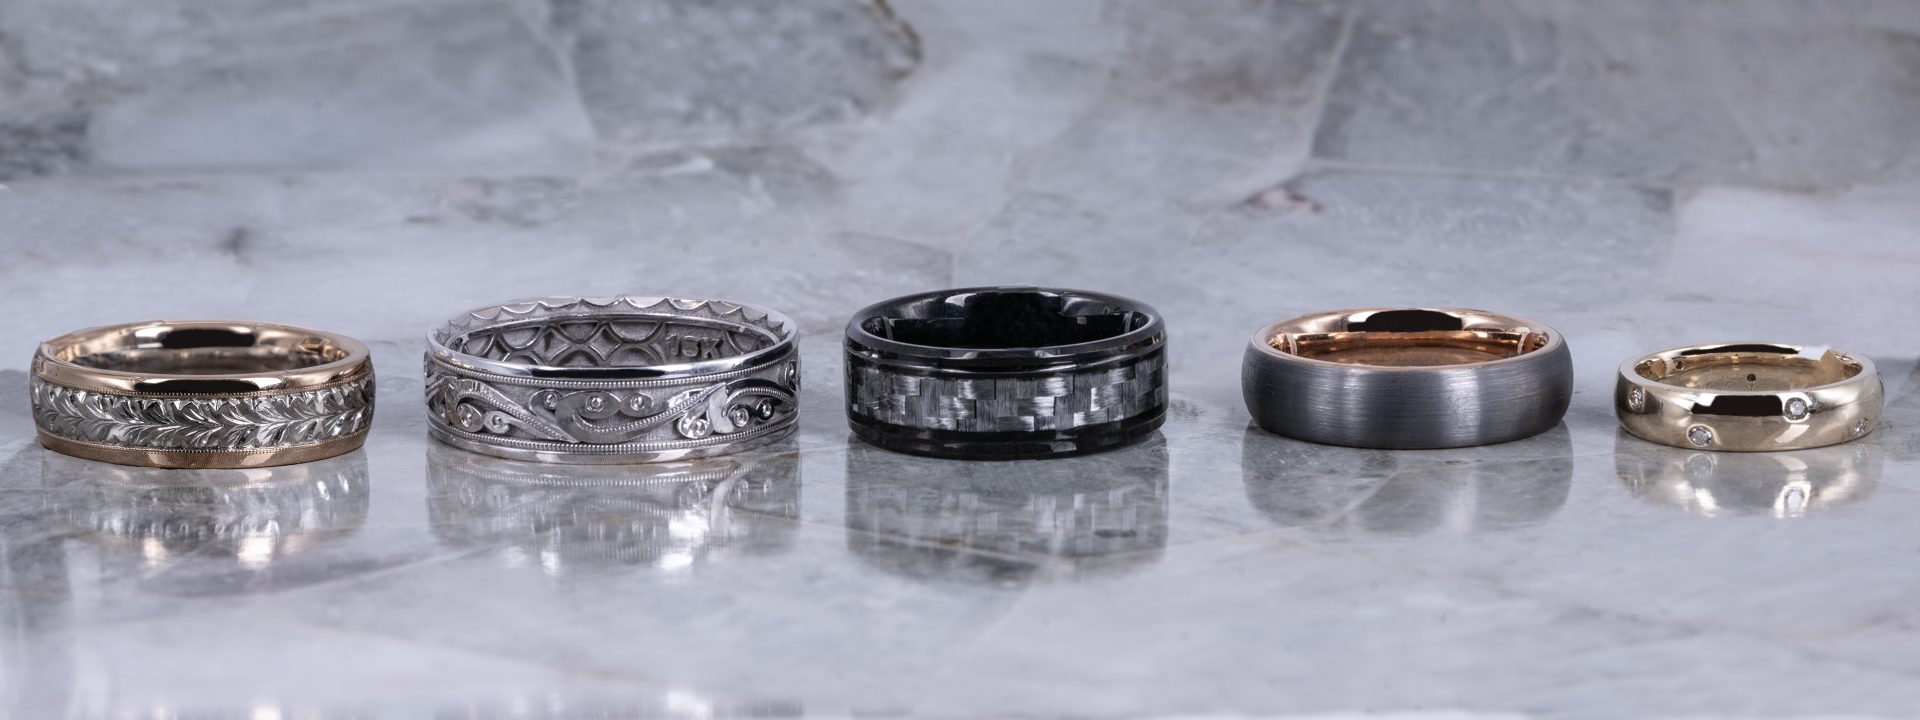 Five various men's wedding bands on marble background.